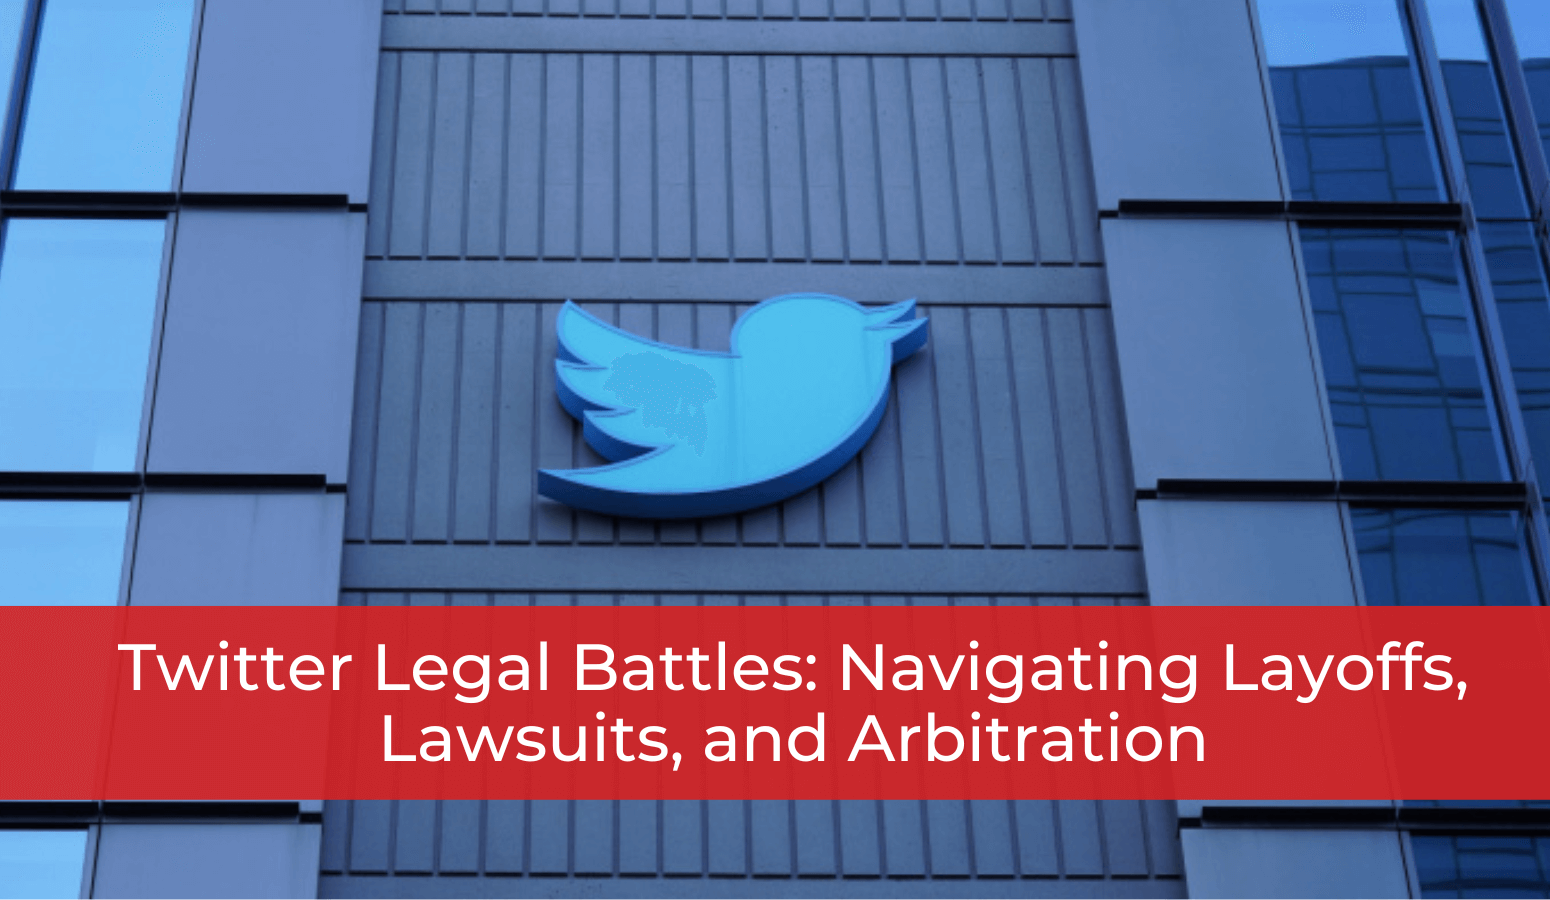 Featured image for “Twitter Legal Battles: Navigating Layoffs, Lawsuits, and Arbitration”